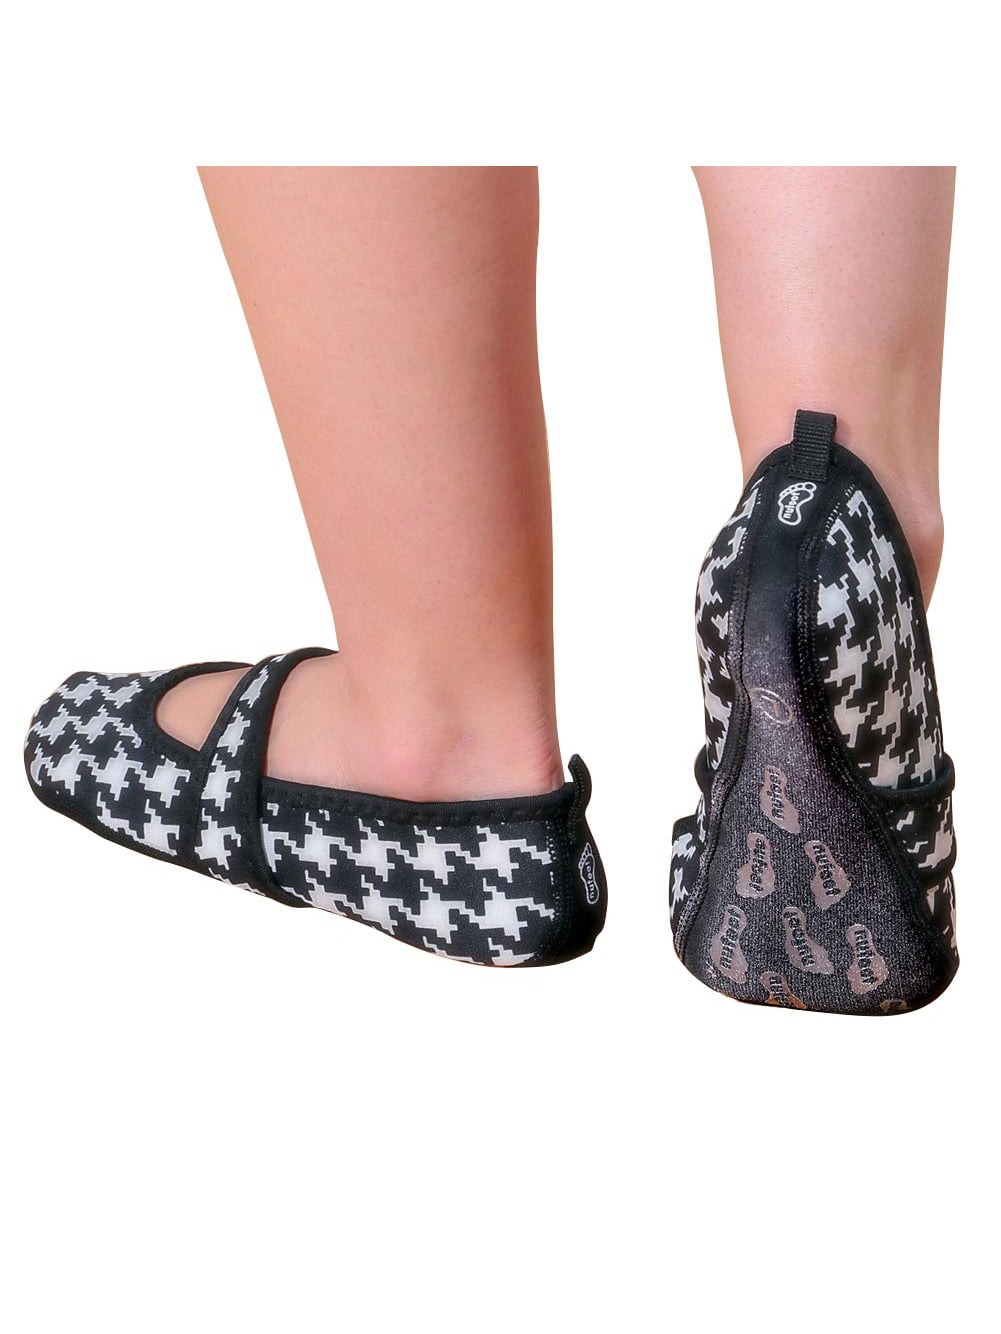 Nufoot - Nufoot Betsy Lou Indoor Womens Shoes Slipper, Black with White ...